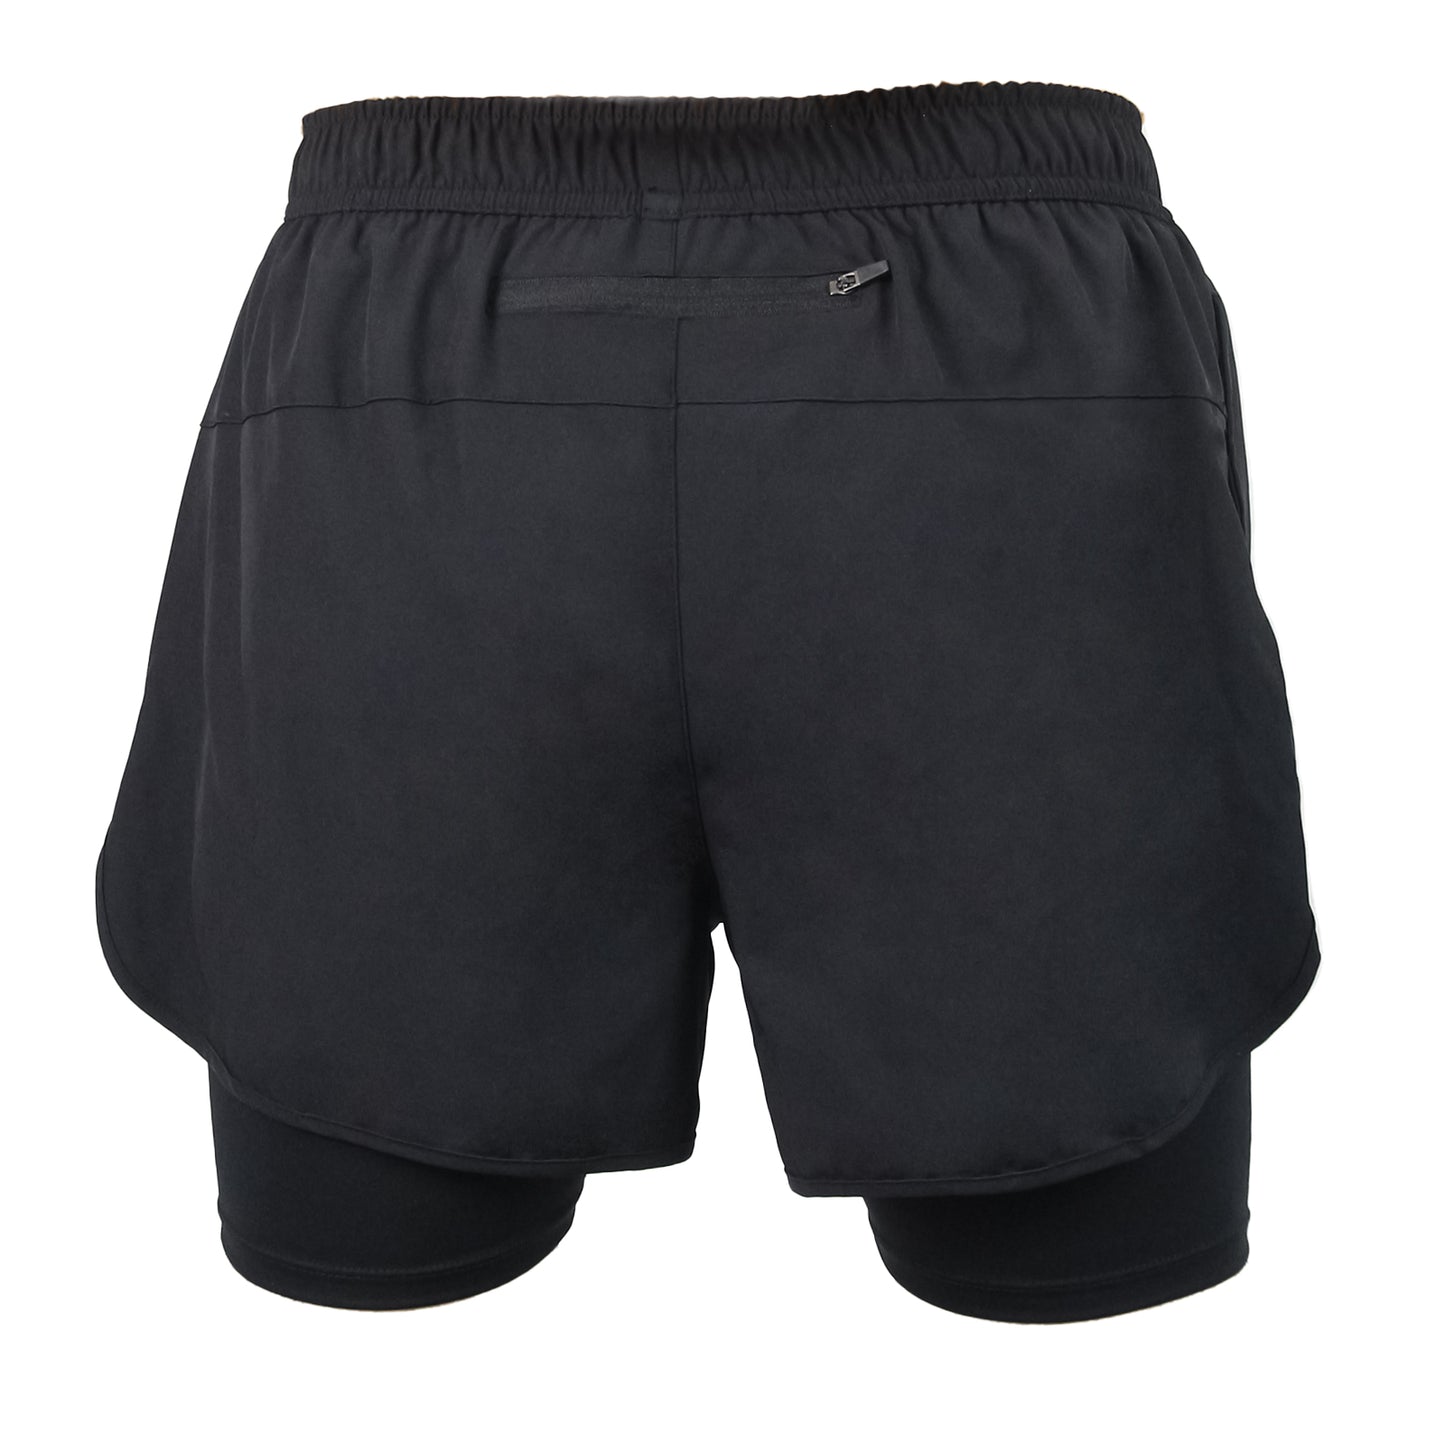 Men 2-in-1 Running Shorts Quick Drying Breathable Men Cycling Shorts